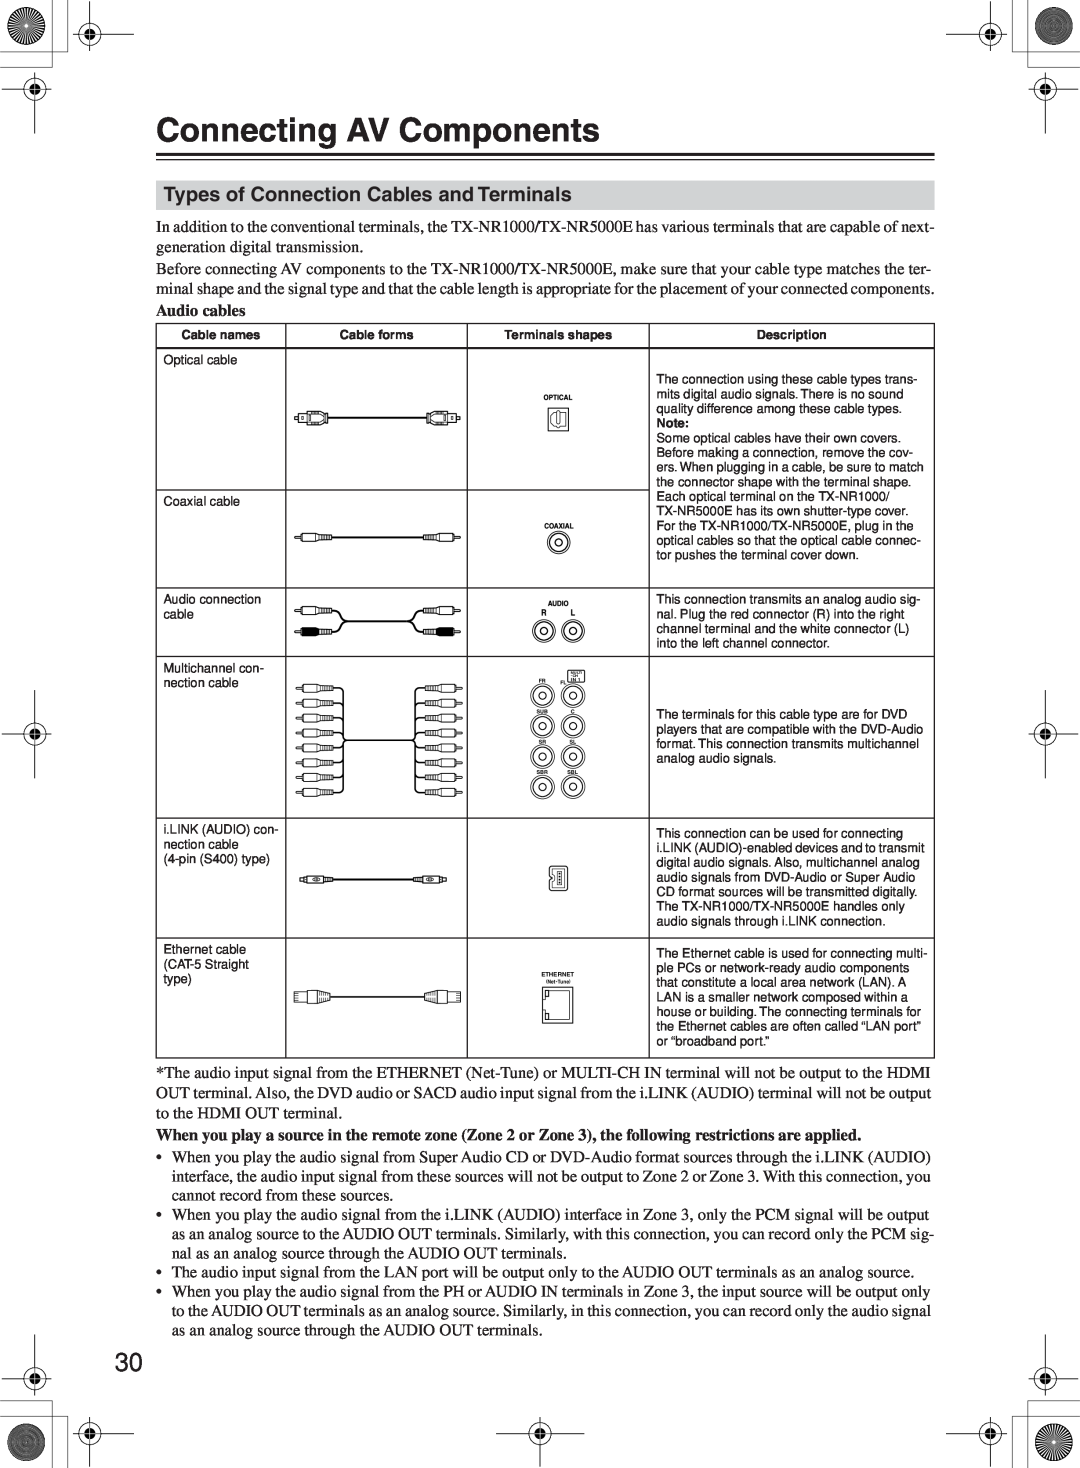 Onkyo TX-NR1000 instruction manual Connecting AV Components, Types of Connection Cables and Terminals, Audio cables 